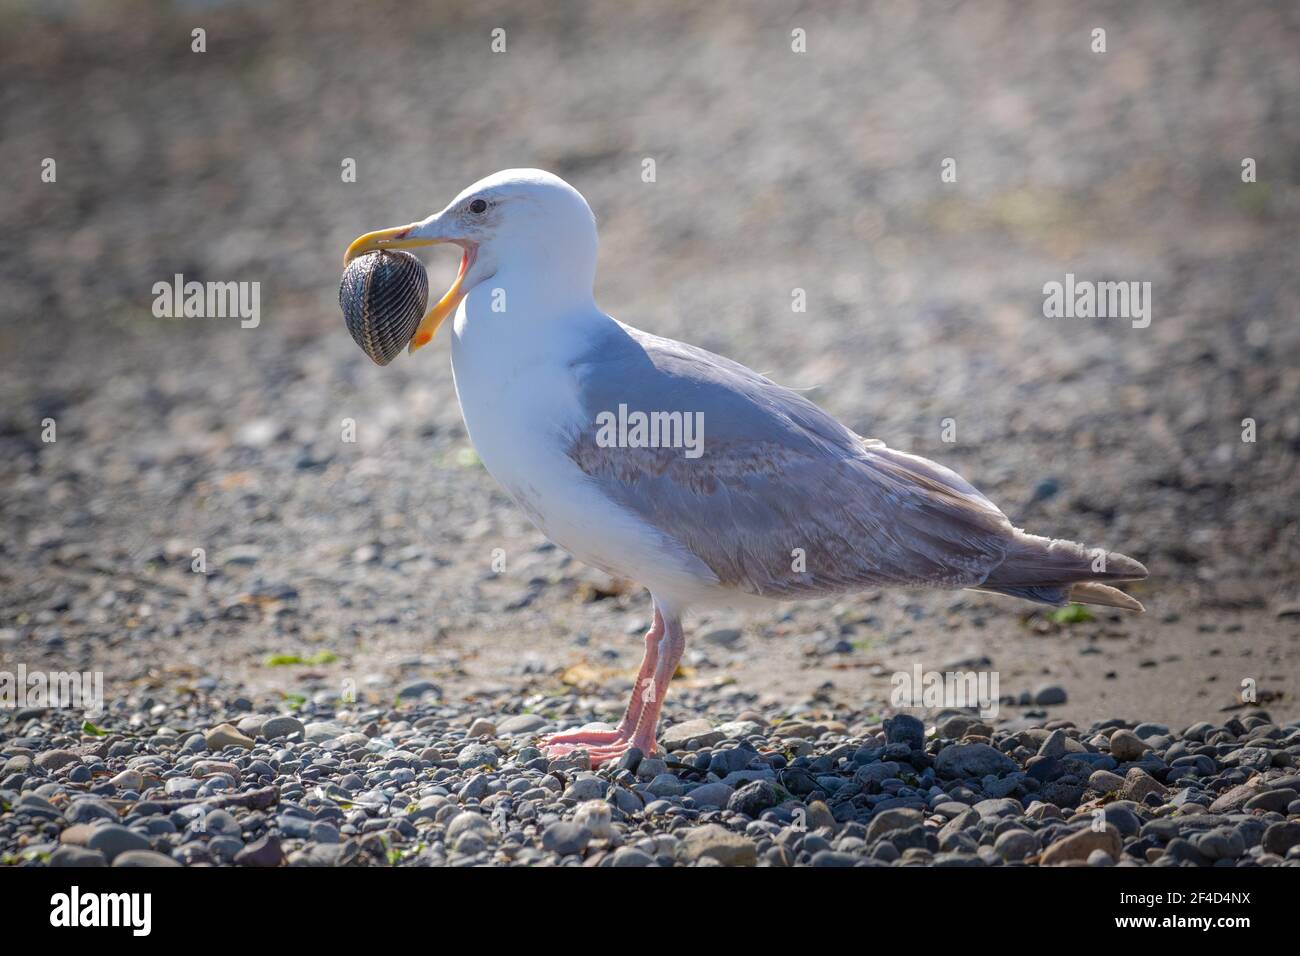 A glaucous-winged gull standing on the beach with a clam in its mouth. Stock Photo